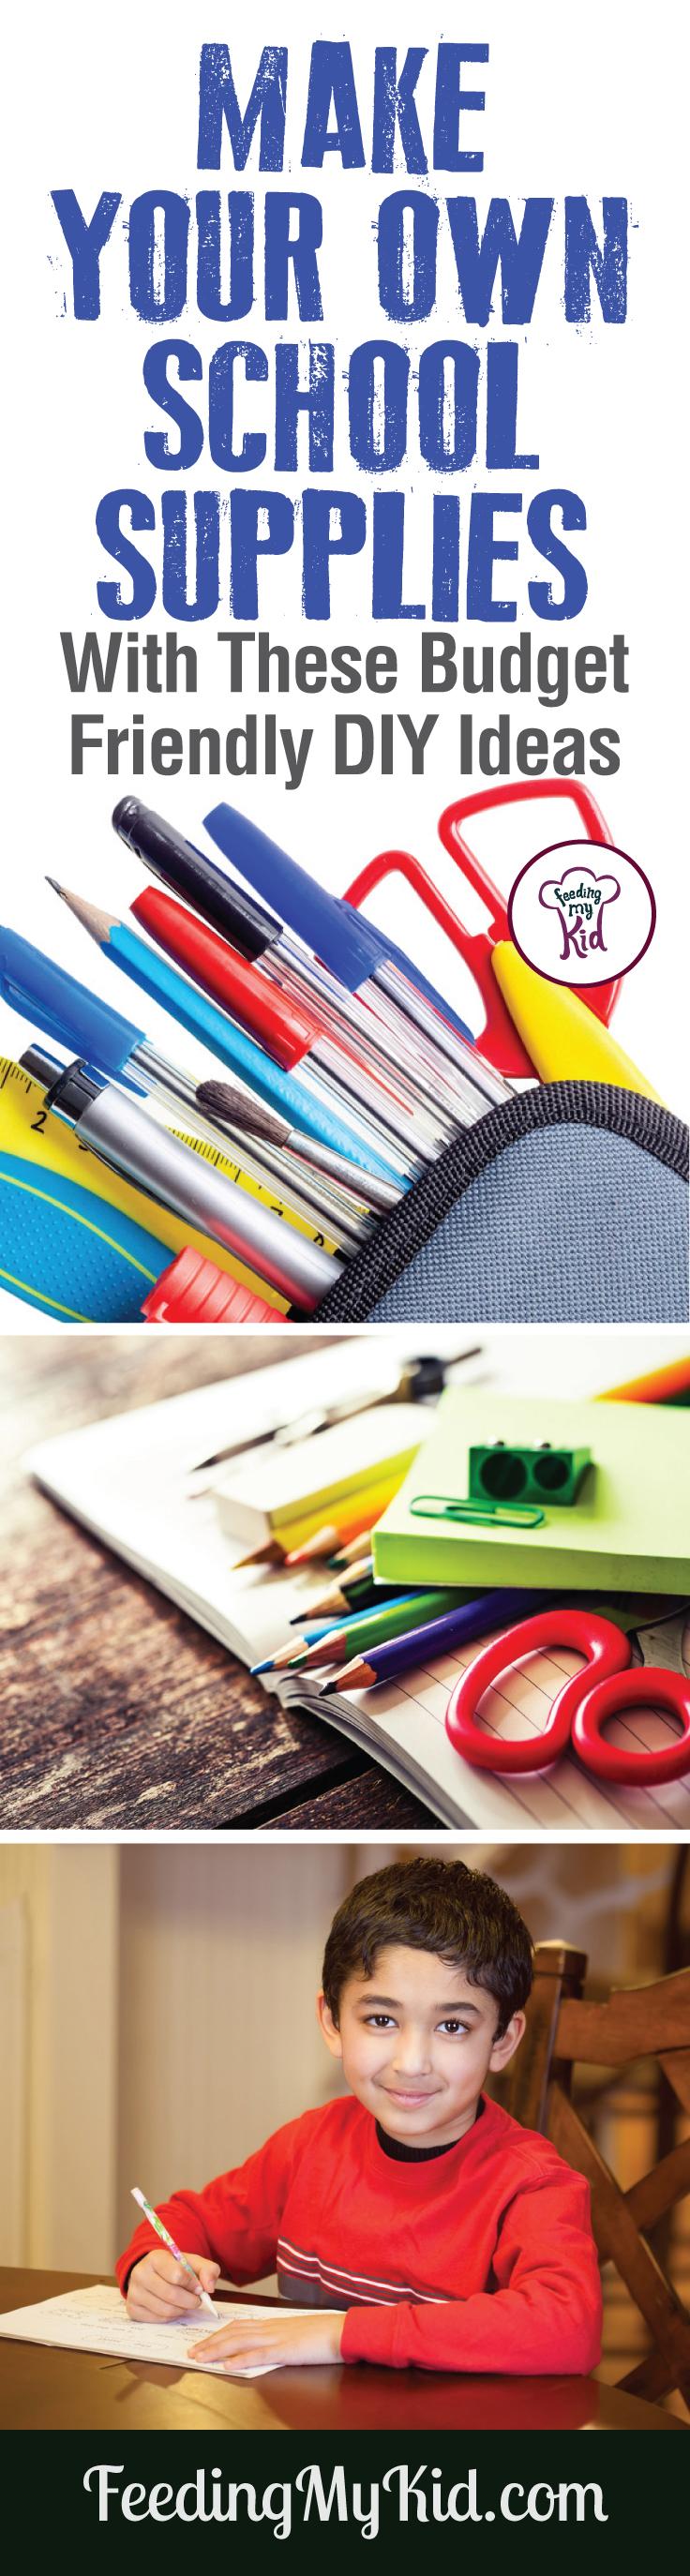 Make your own school supplies with this back to school DIY video! Get inspired with these budget-friendly tips to make personalized supplies.